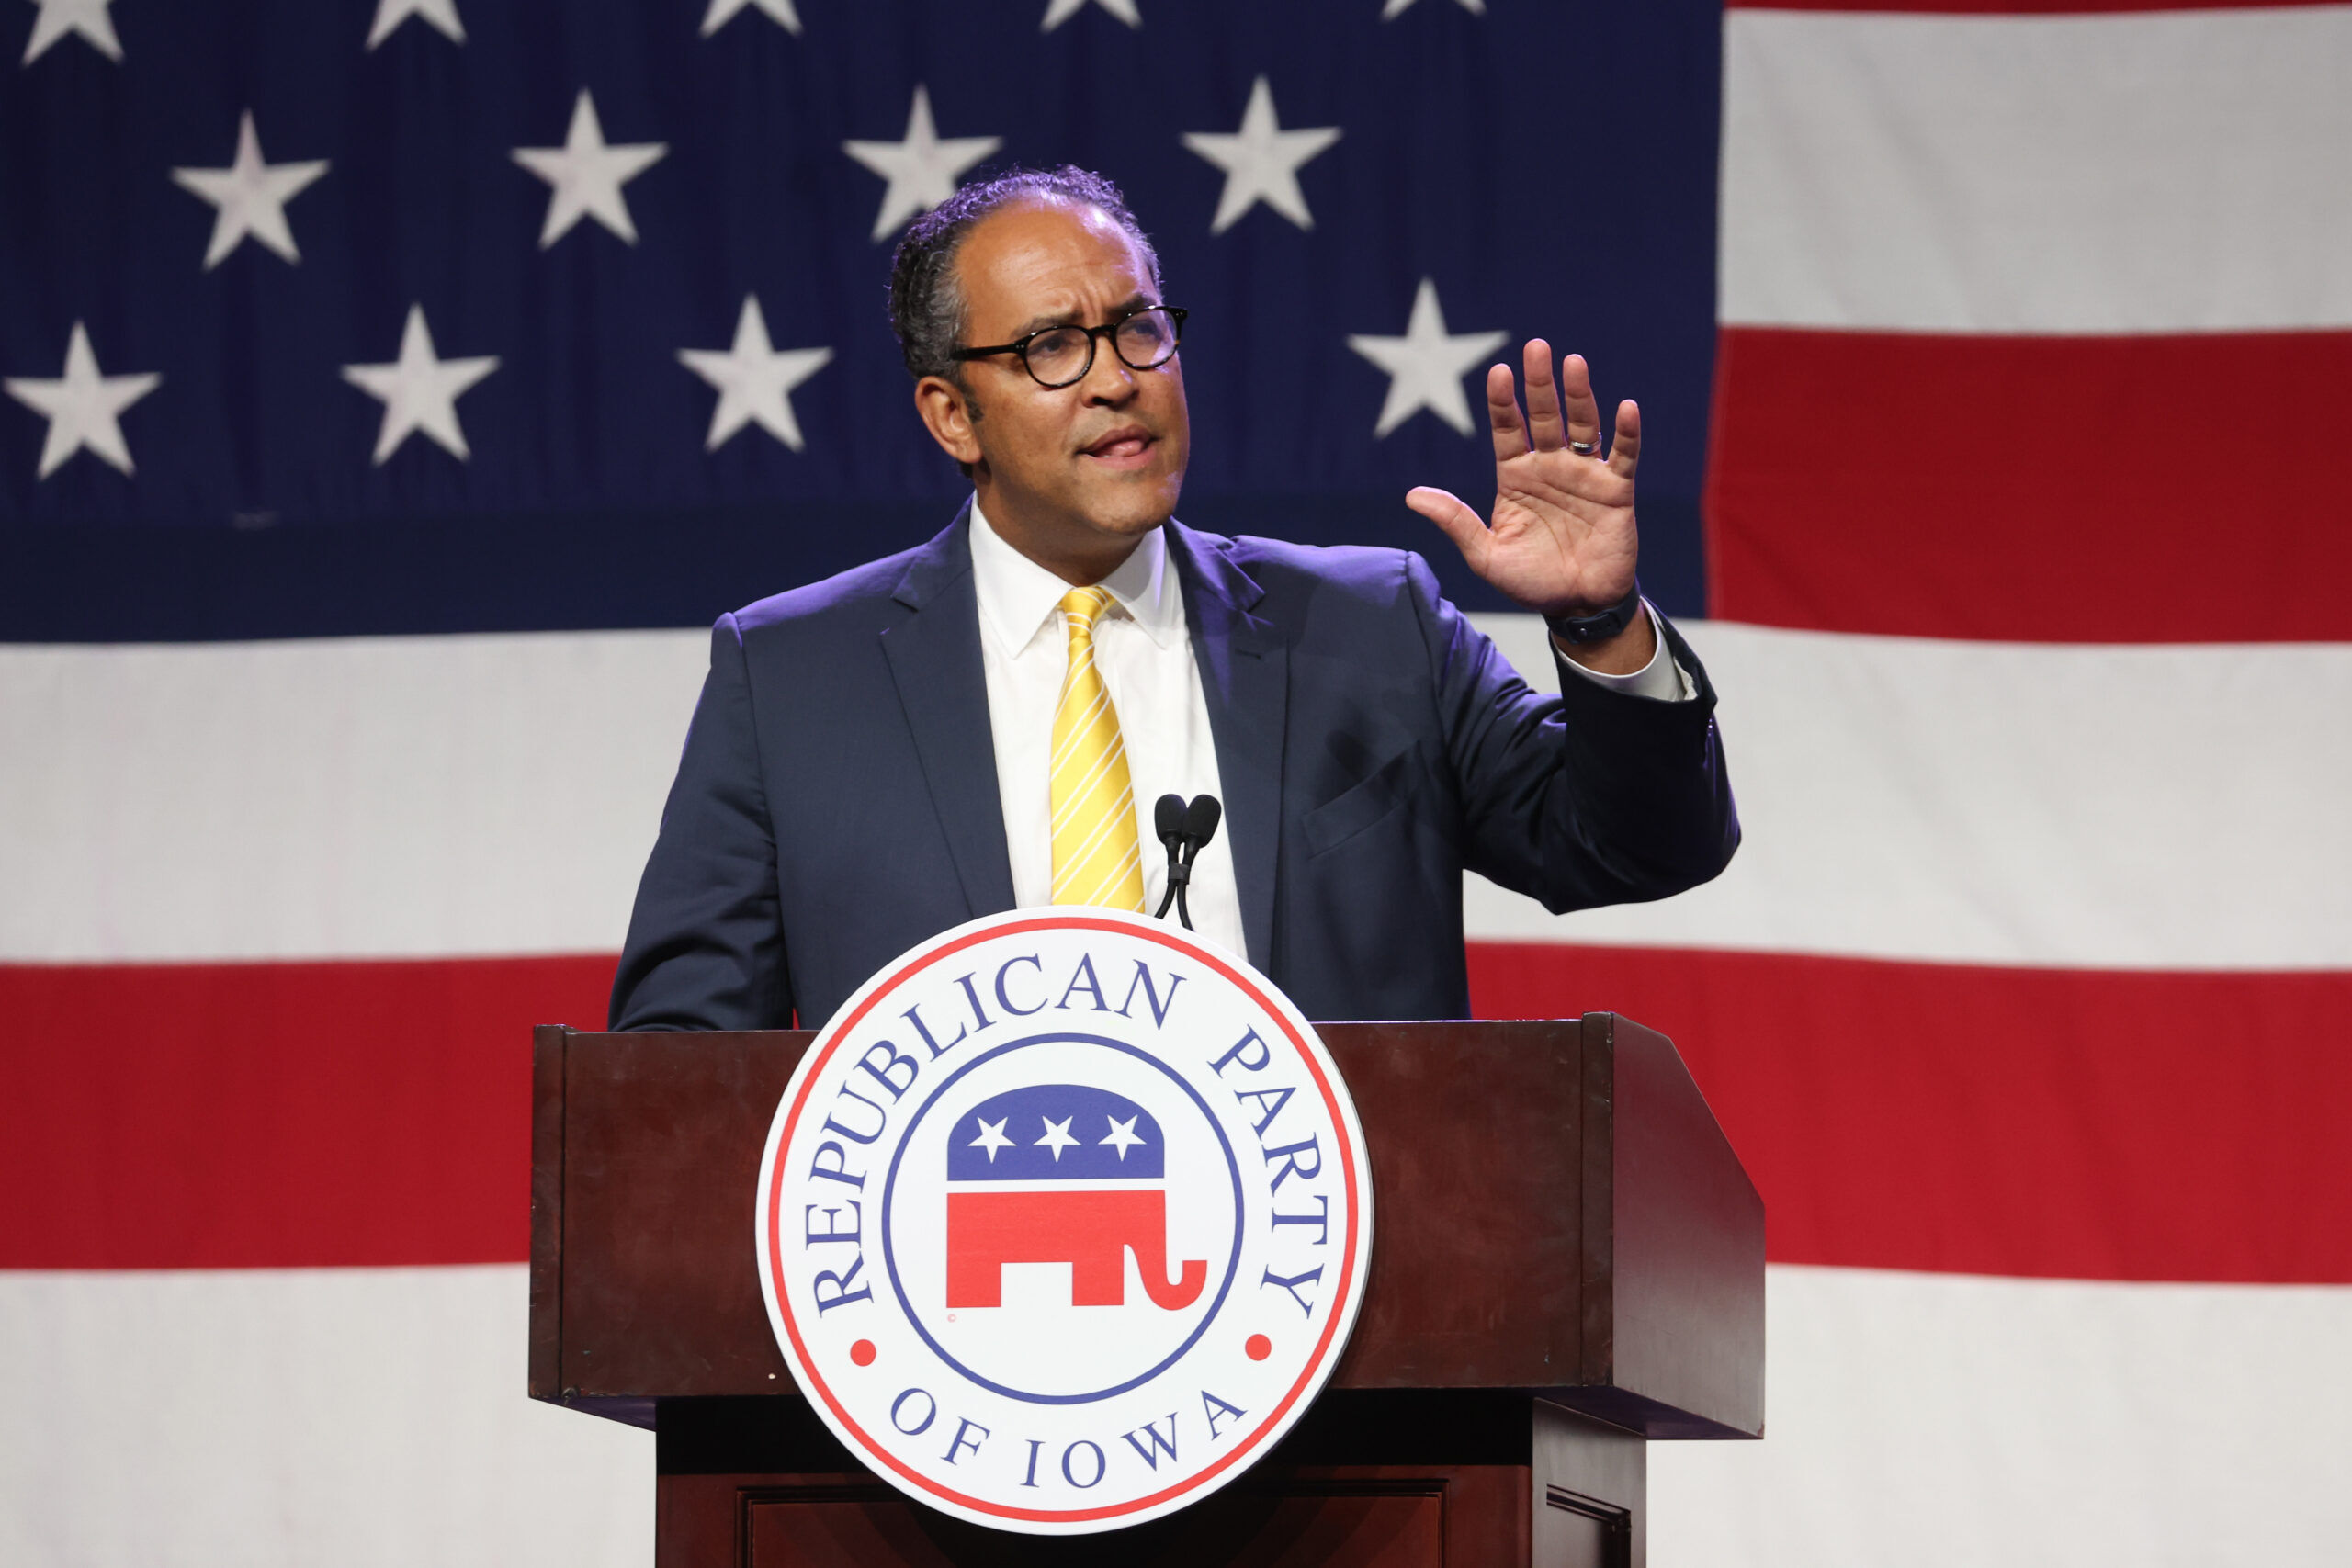 DES MOINES, IOWA - JULY 28: Republican presidential candidate former Texas Congressman Will Hurd speaks to guests at the Republican Party of Iowa 2023 Lincoln Dinner on July 28, 2023 in Des Moines, Iowa. Thirteen Republican presidential candidates were scheduled to speak at the event.